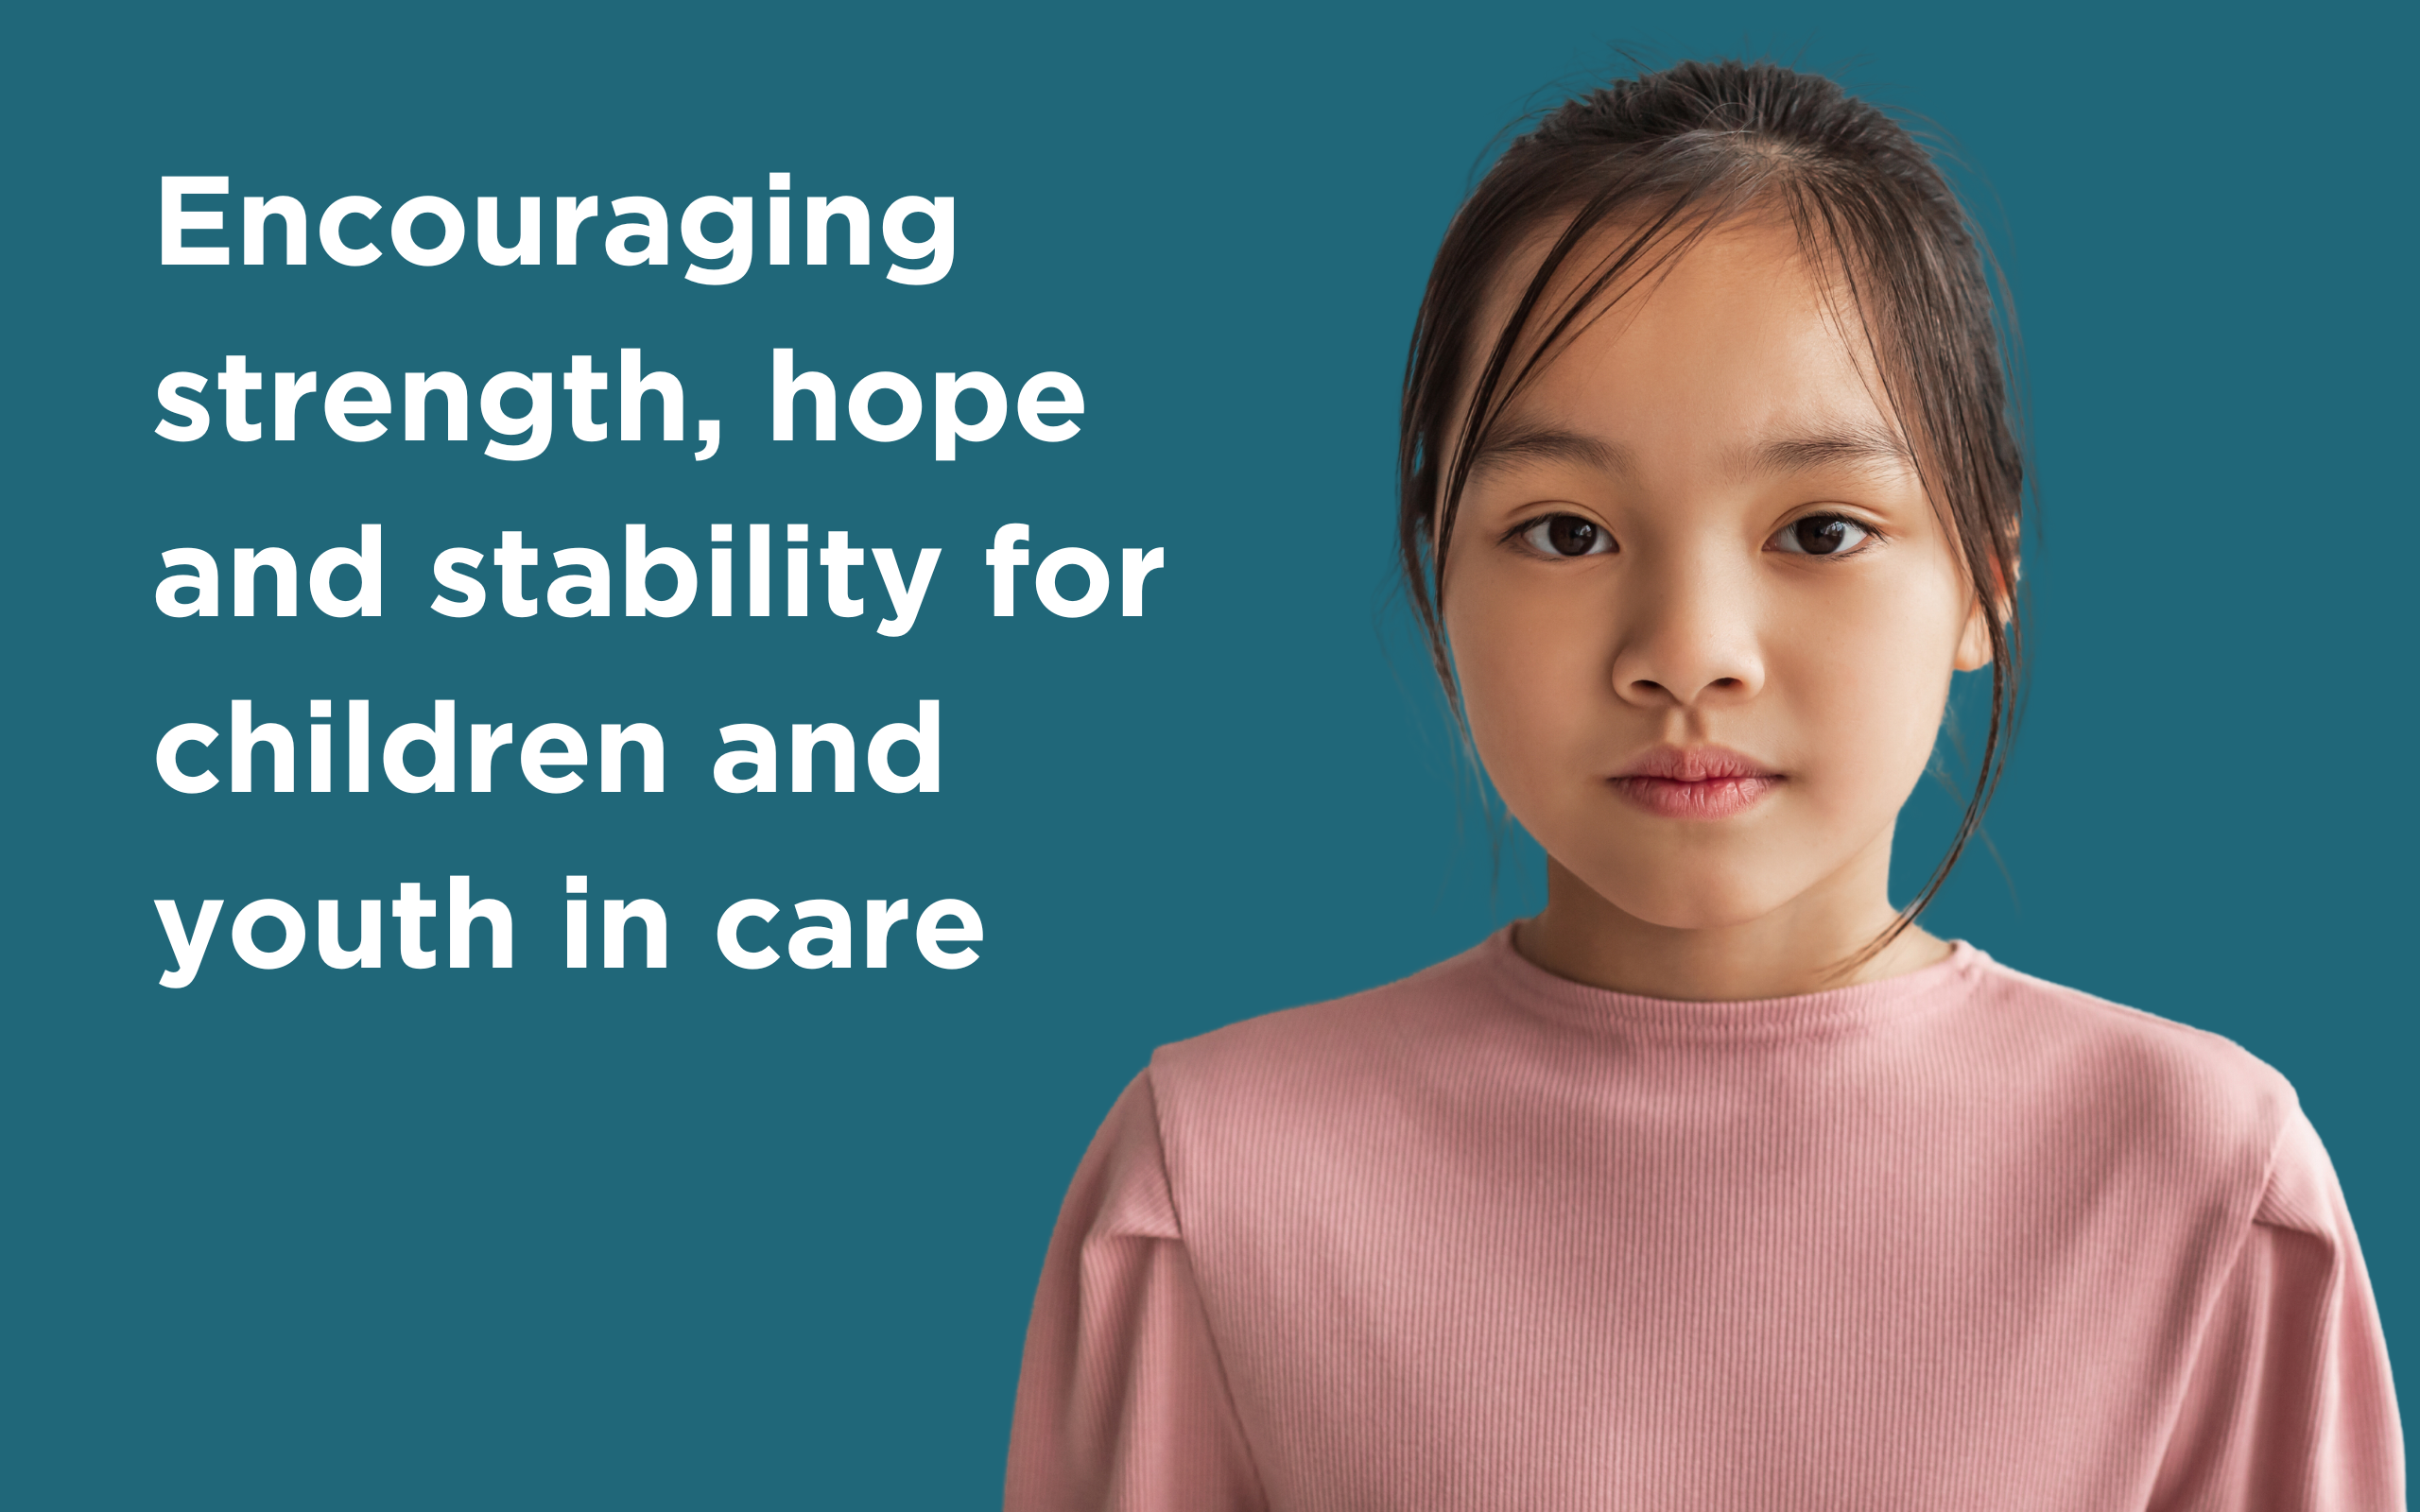 Encouraging strength, hope and stability for children and youth in care